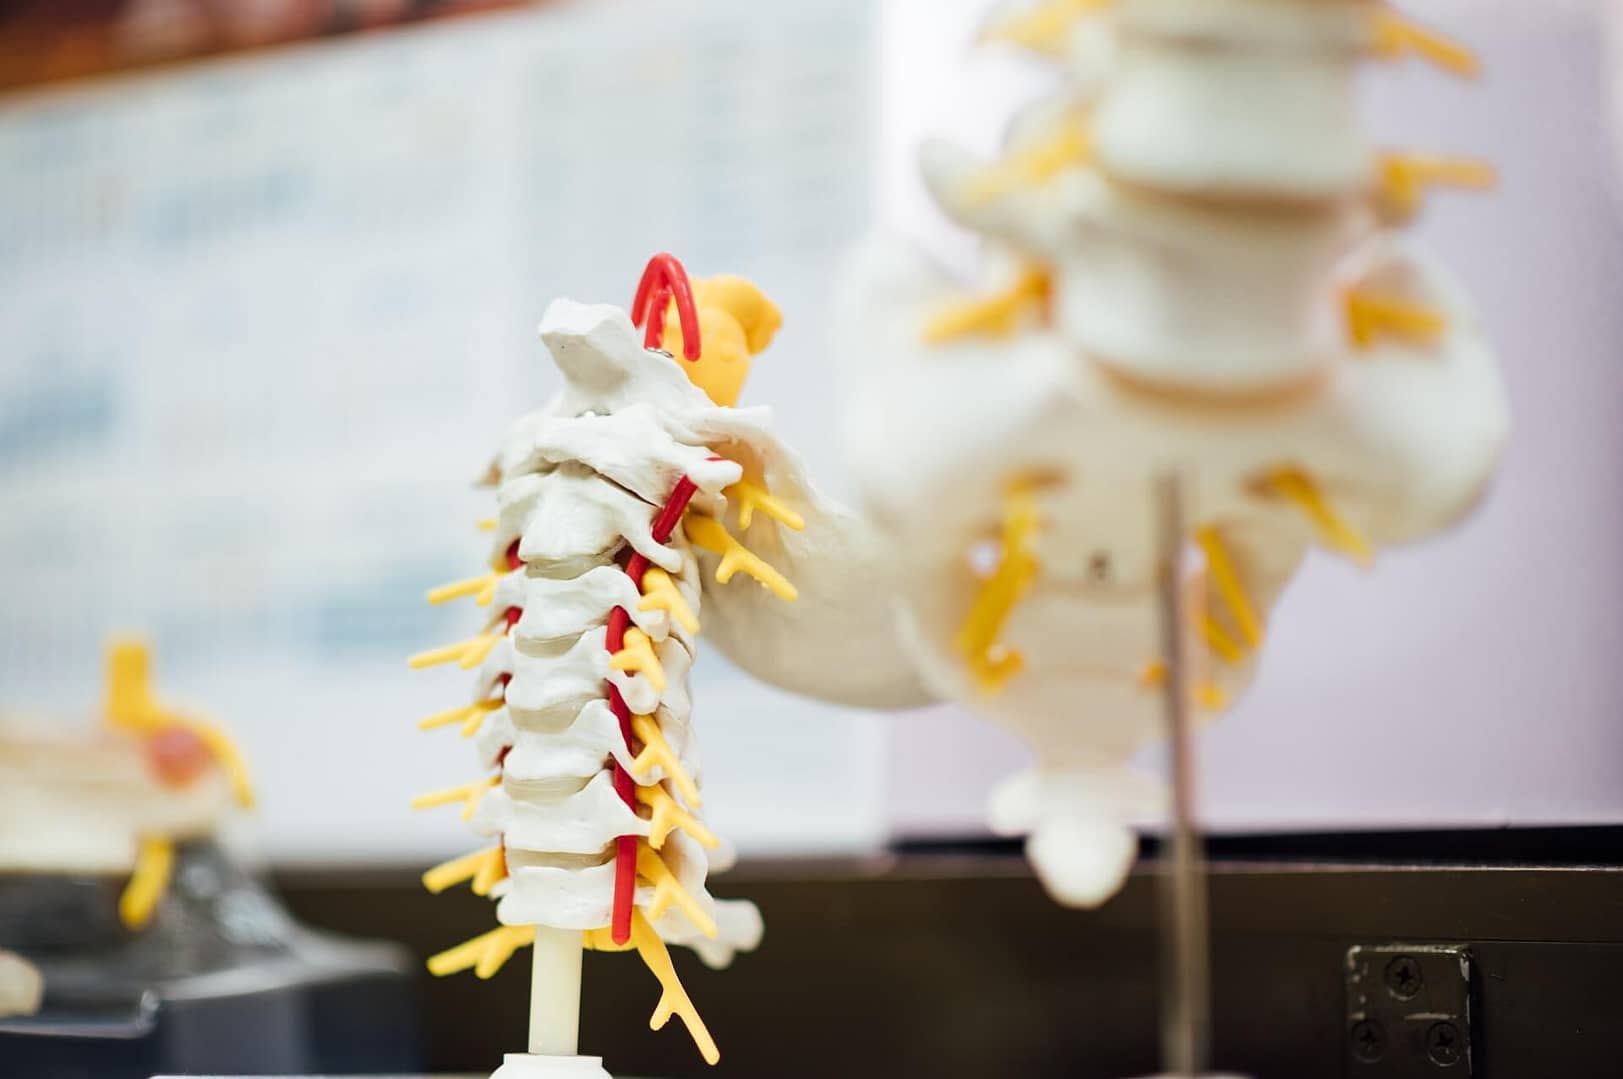 3D Design of a spinal cord